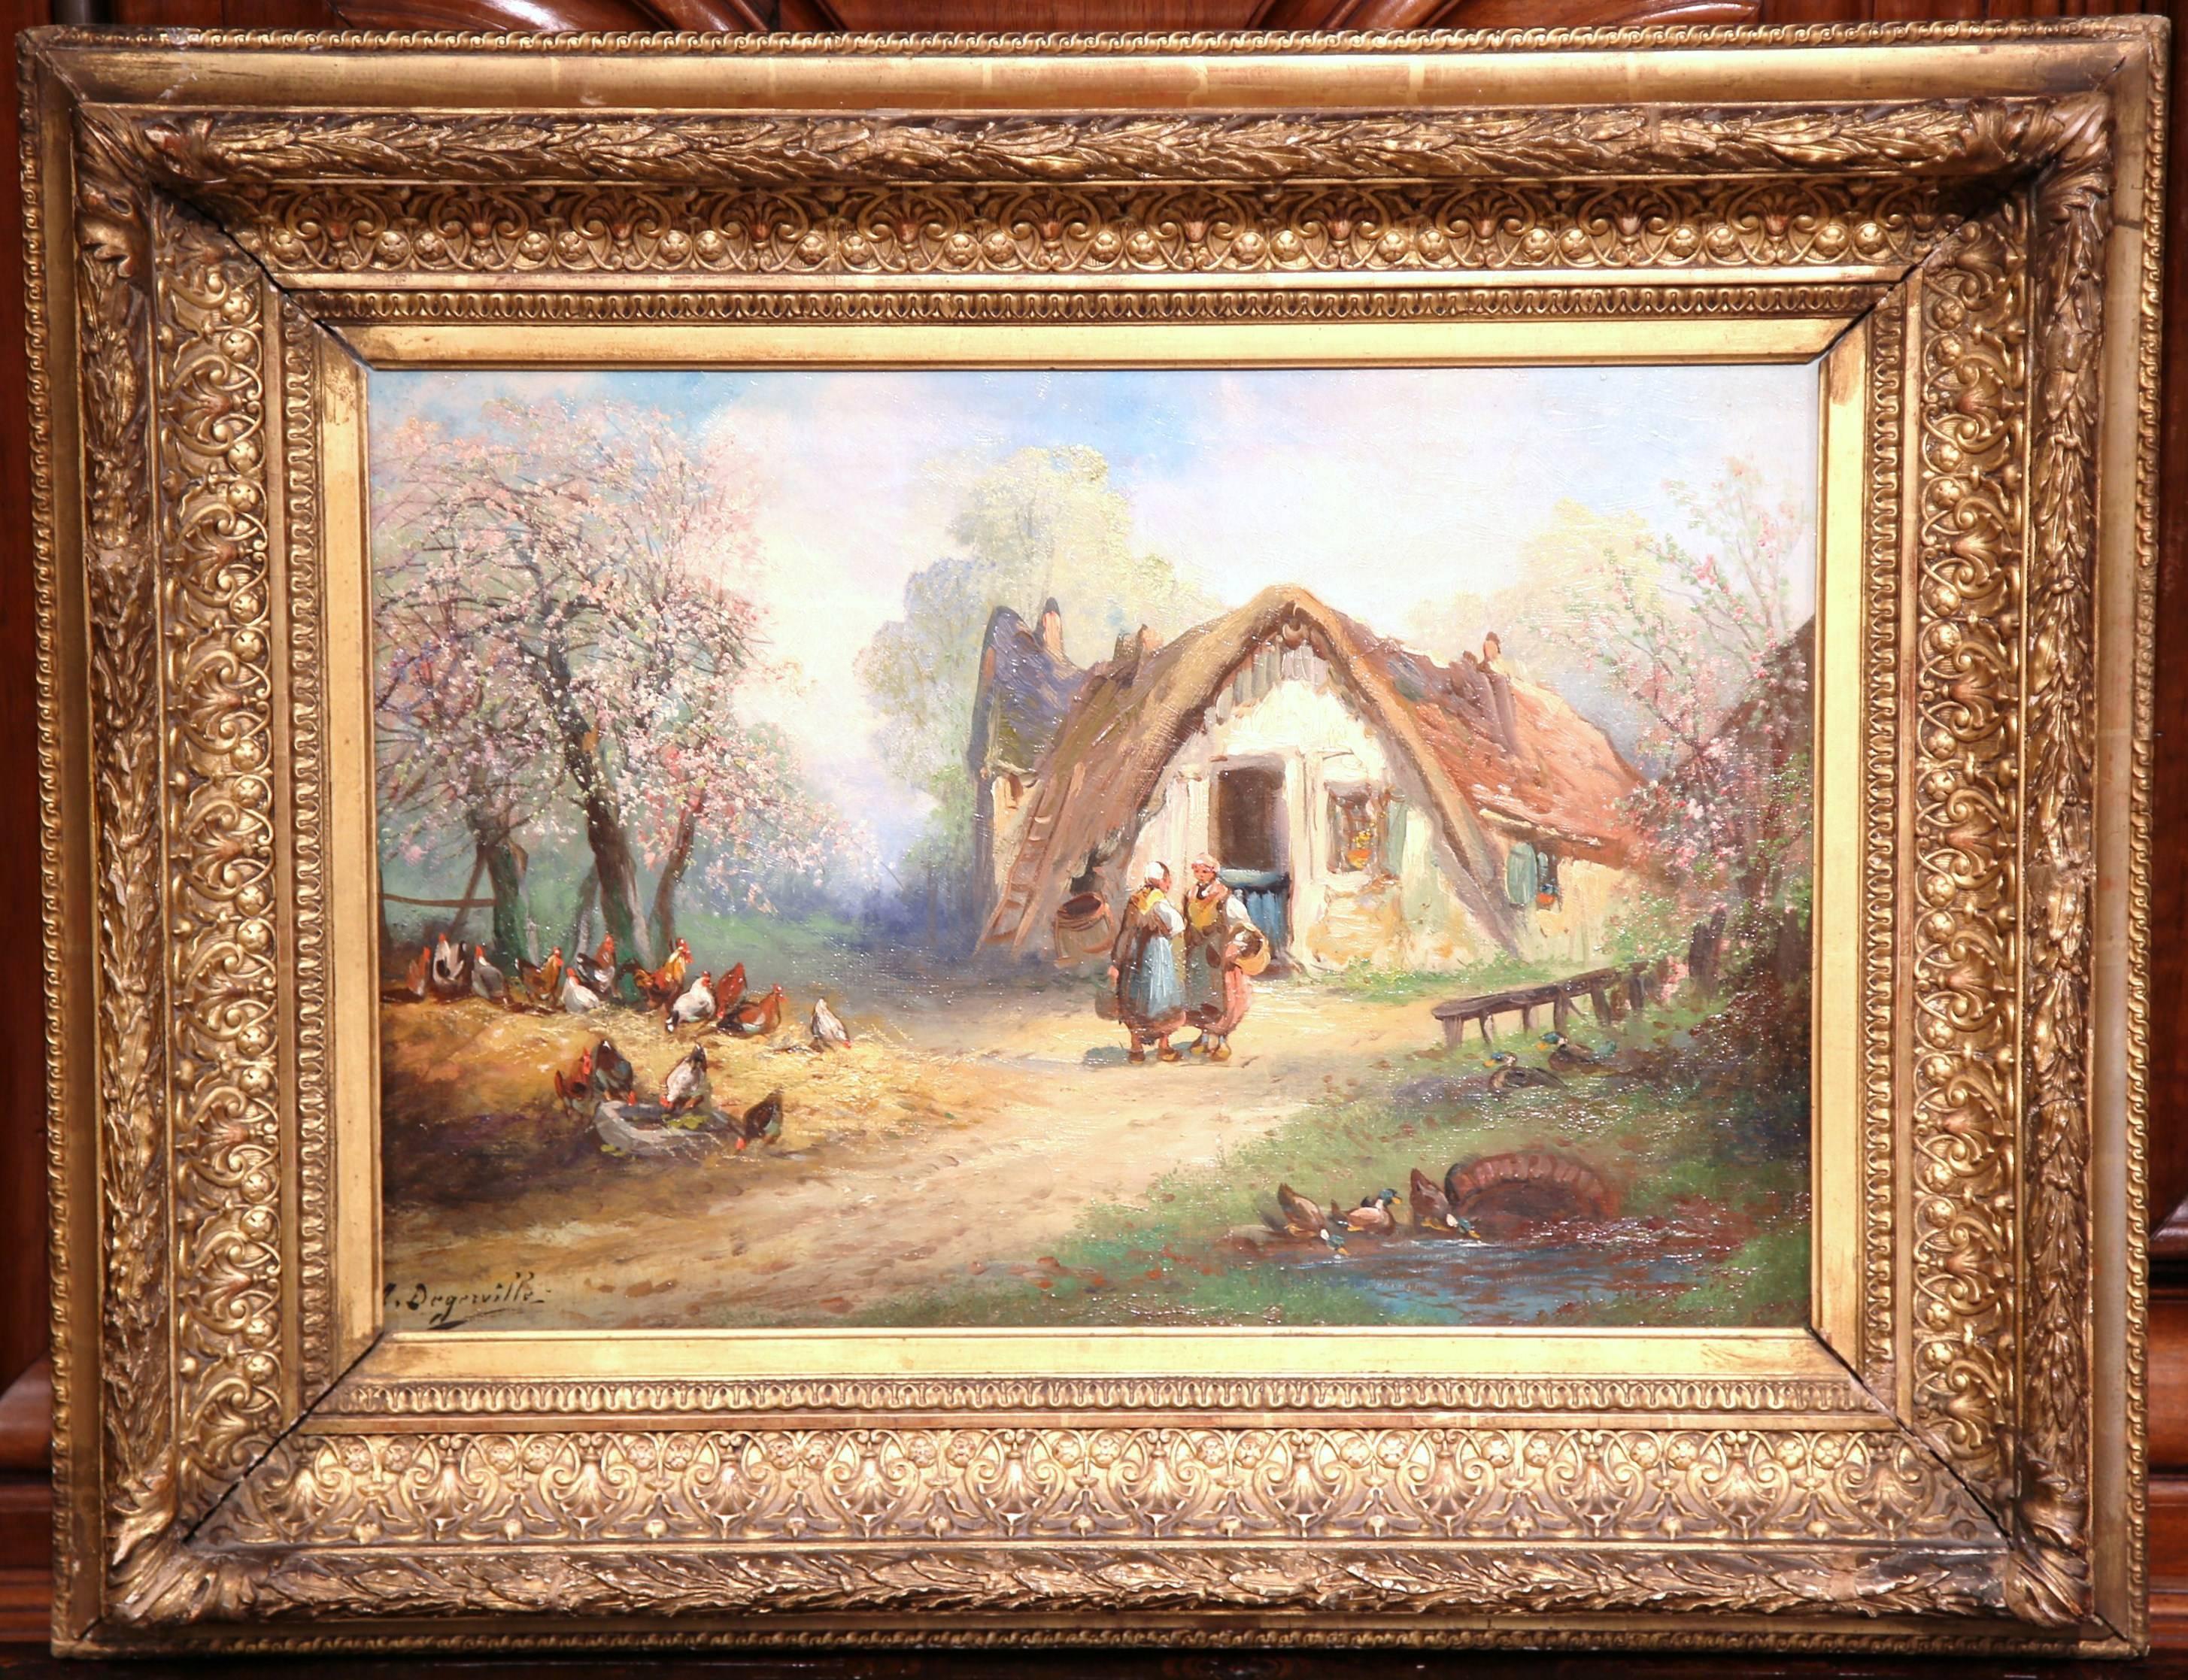 19th Century French Oil on Canvas Country Scene Painting Signed Degerville - Brown Landscape Painting by Unknown